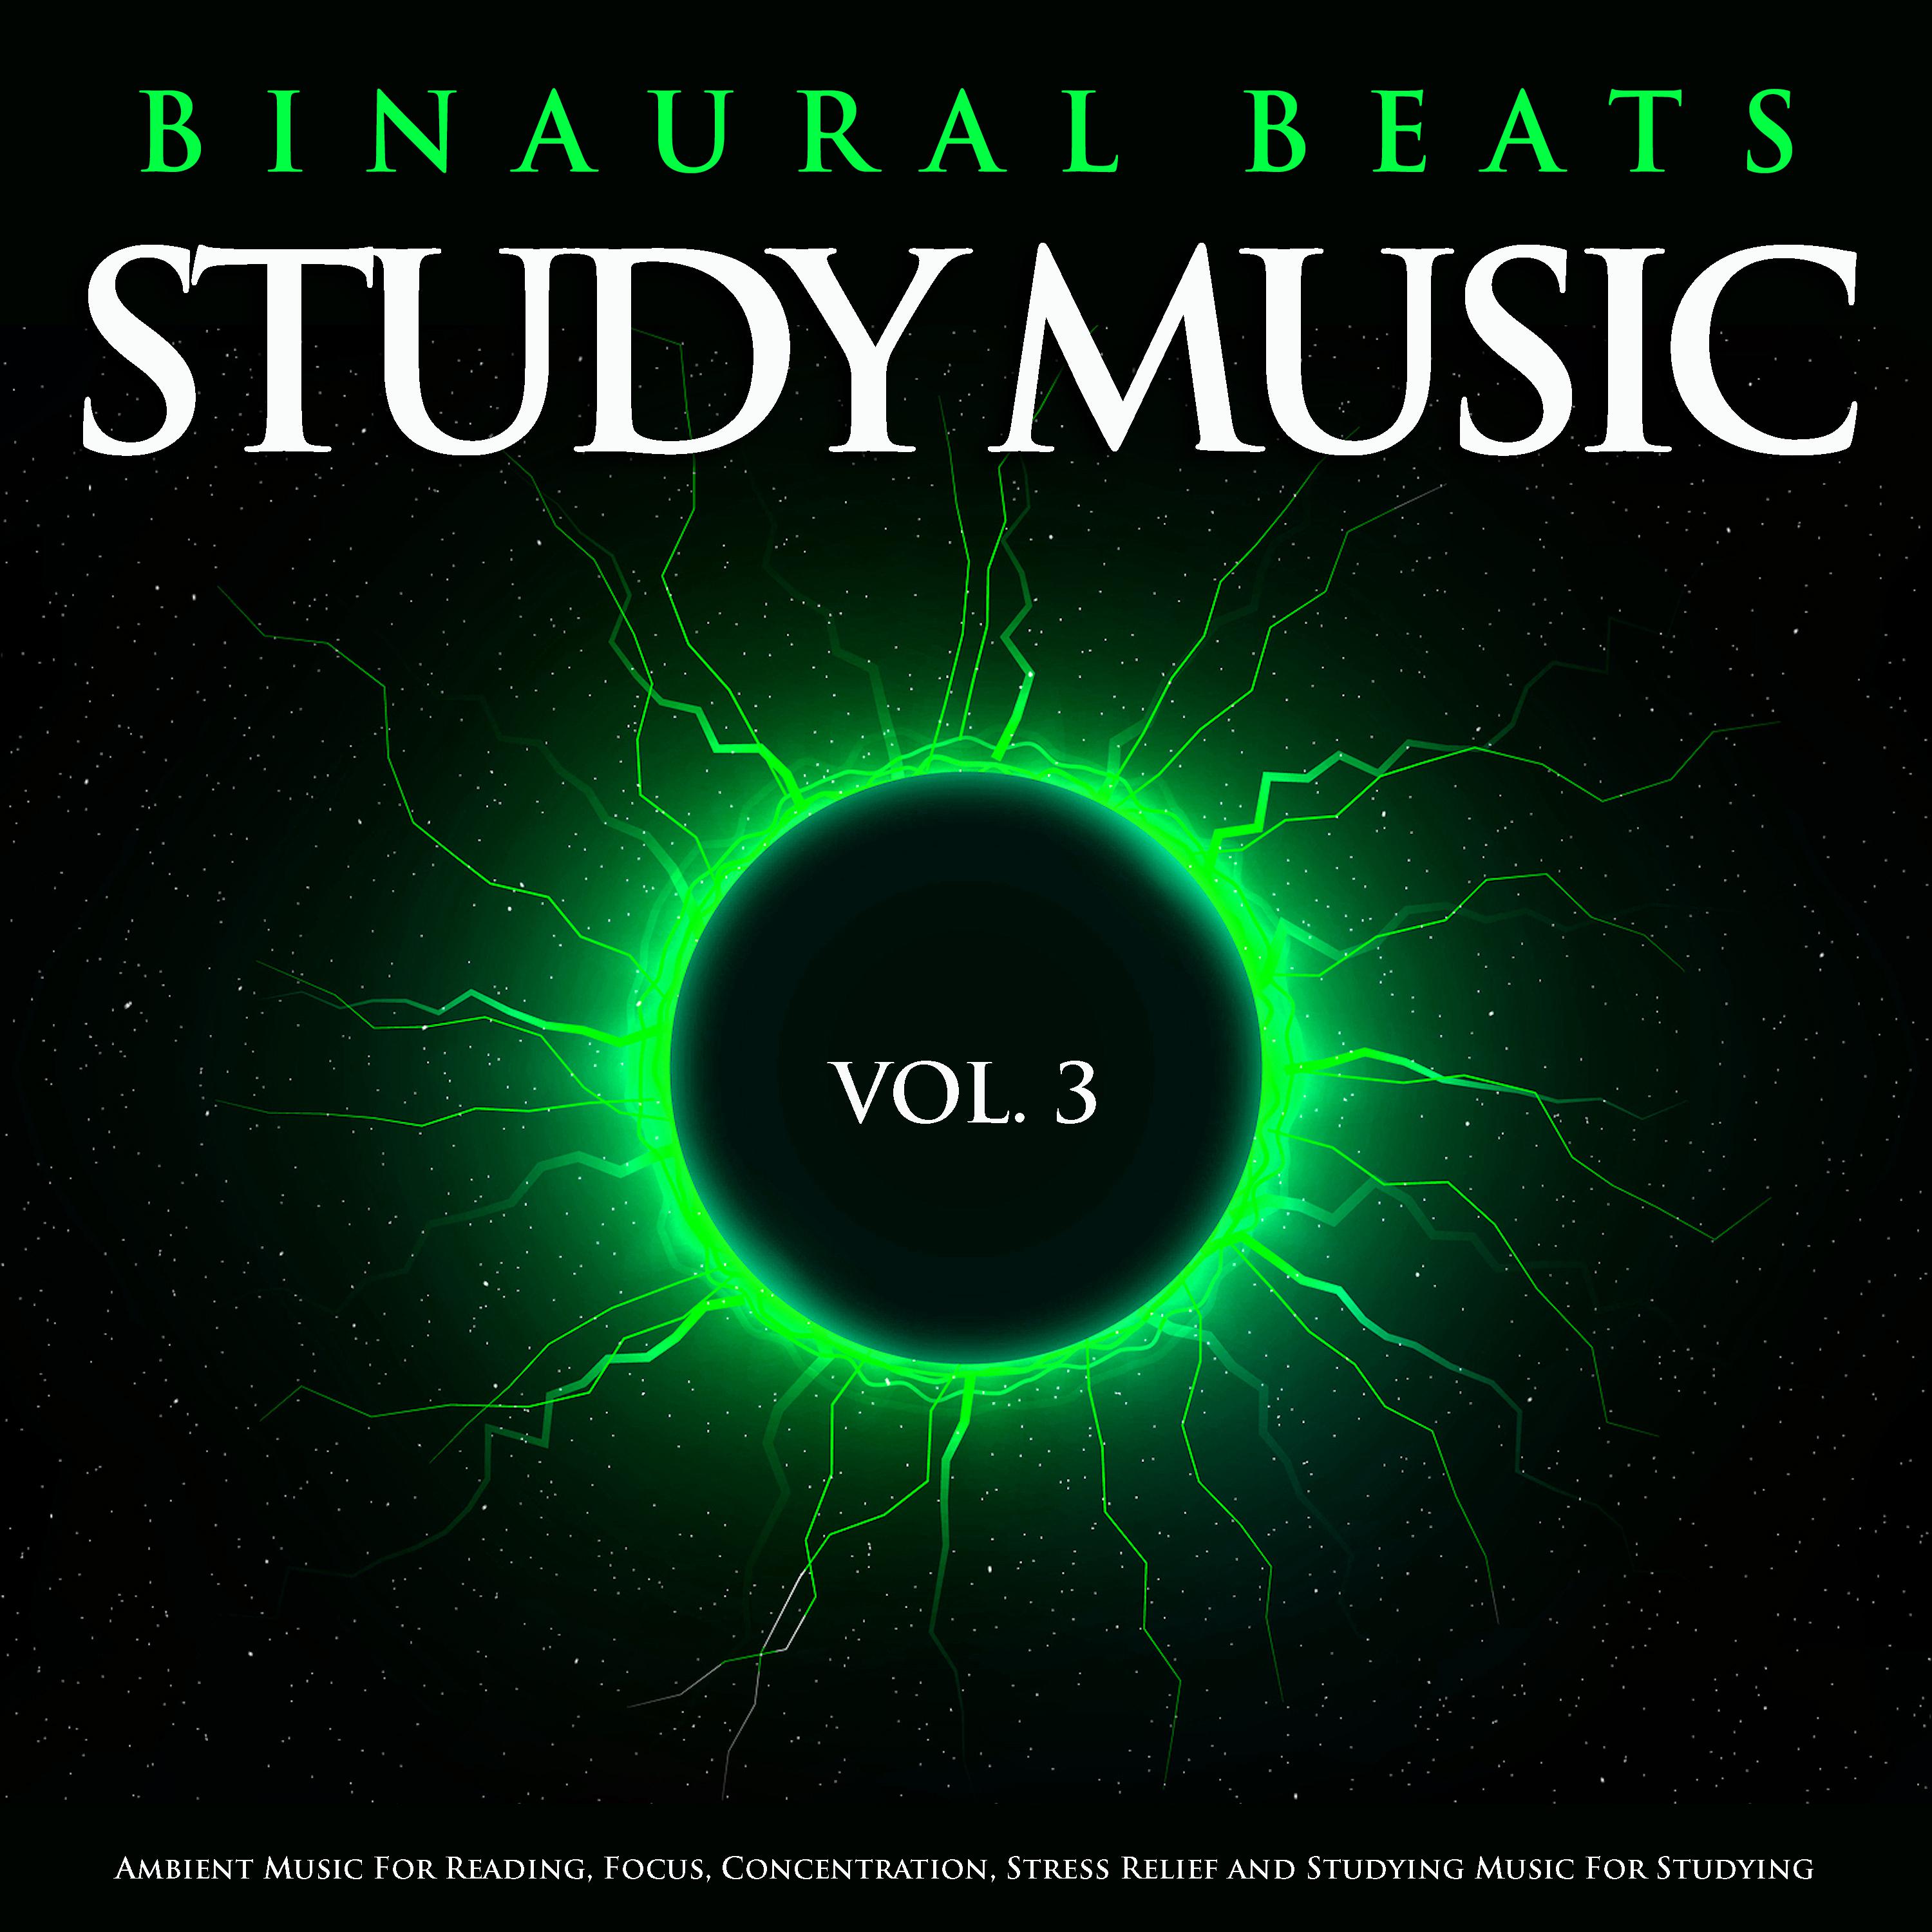 Background Music and Binaural Beats For Studying